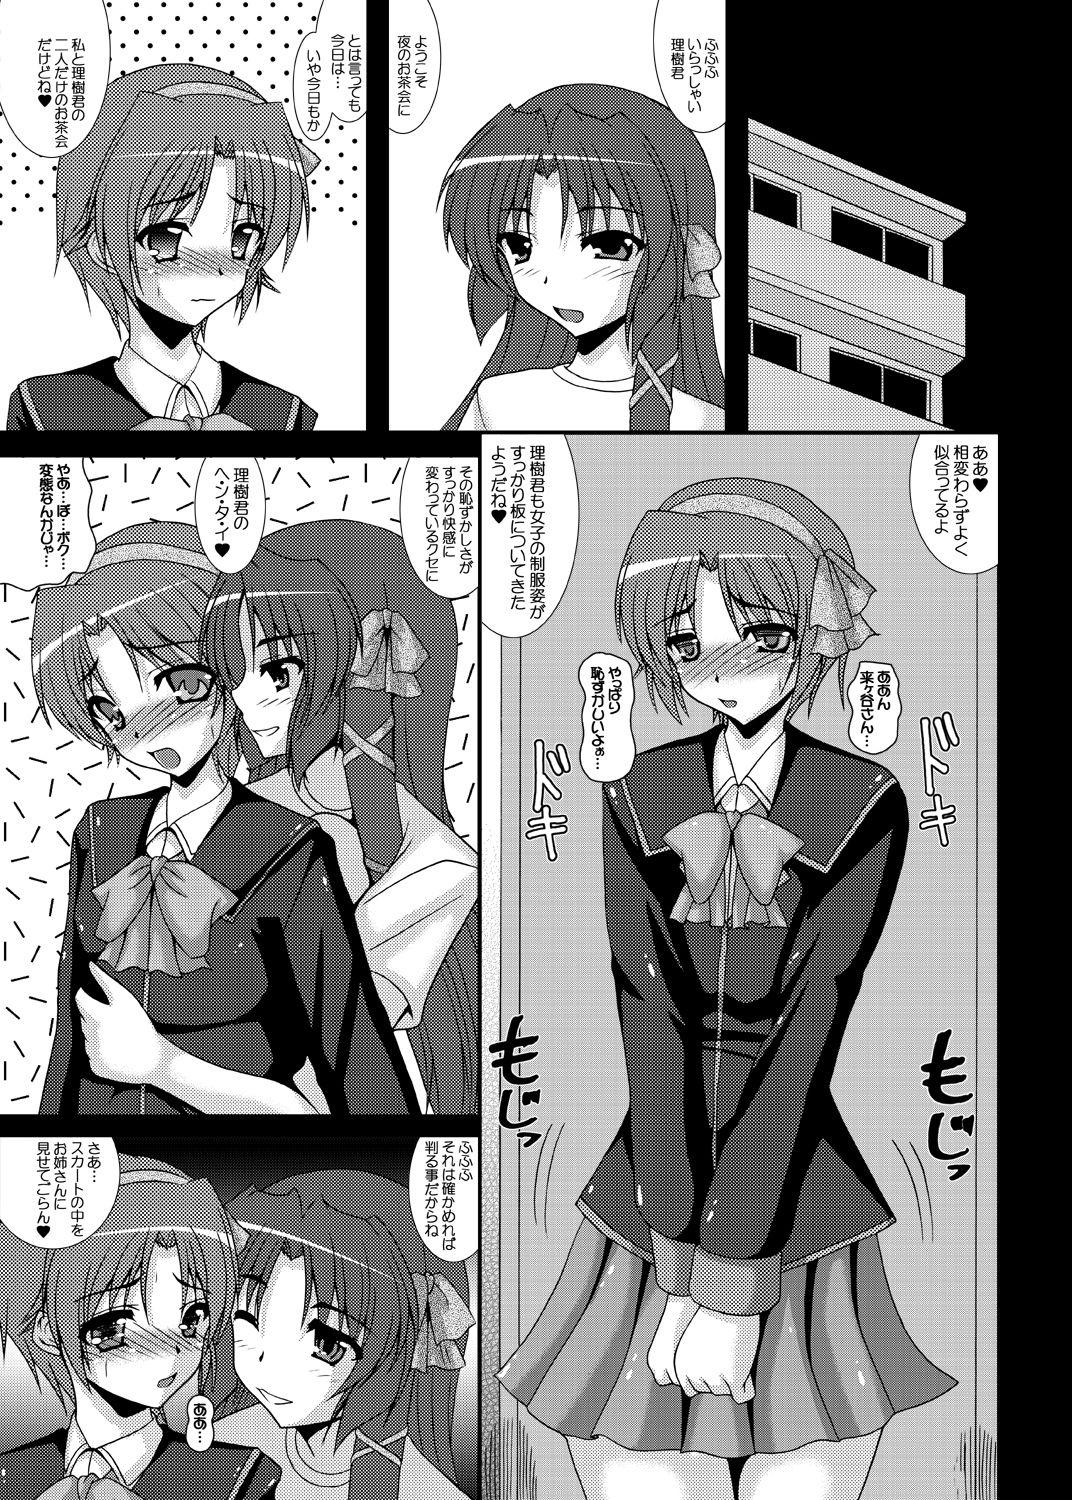 Girl On Girl 理樹君で遊ぼうっ! - Little busters Old - Page 2